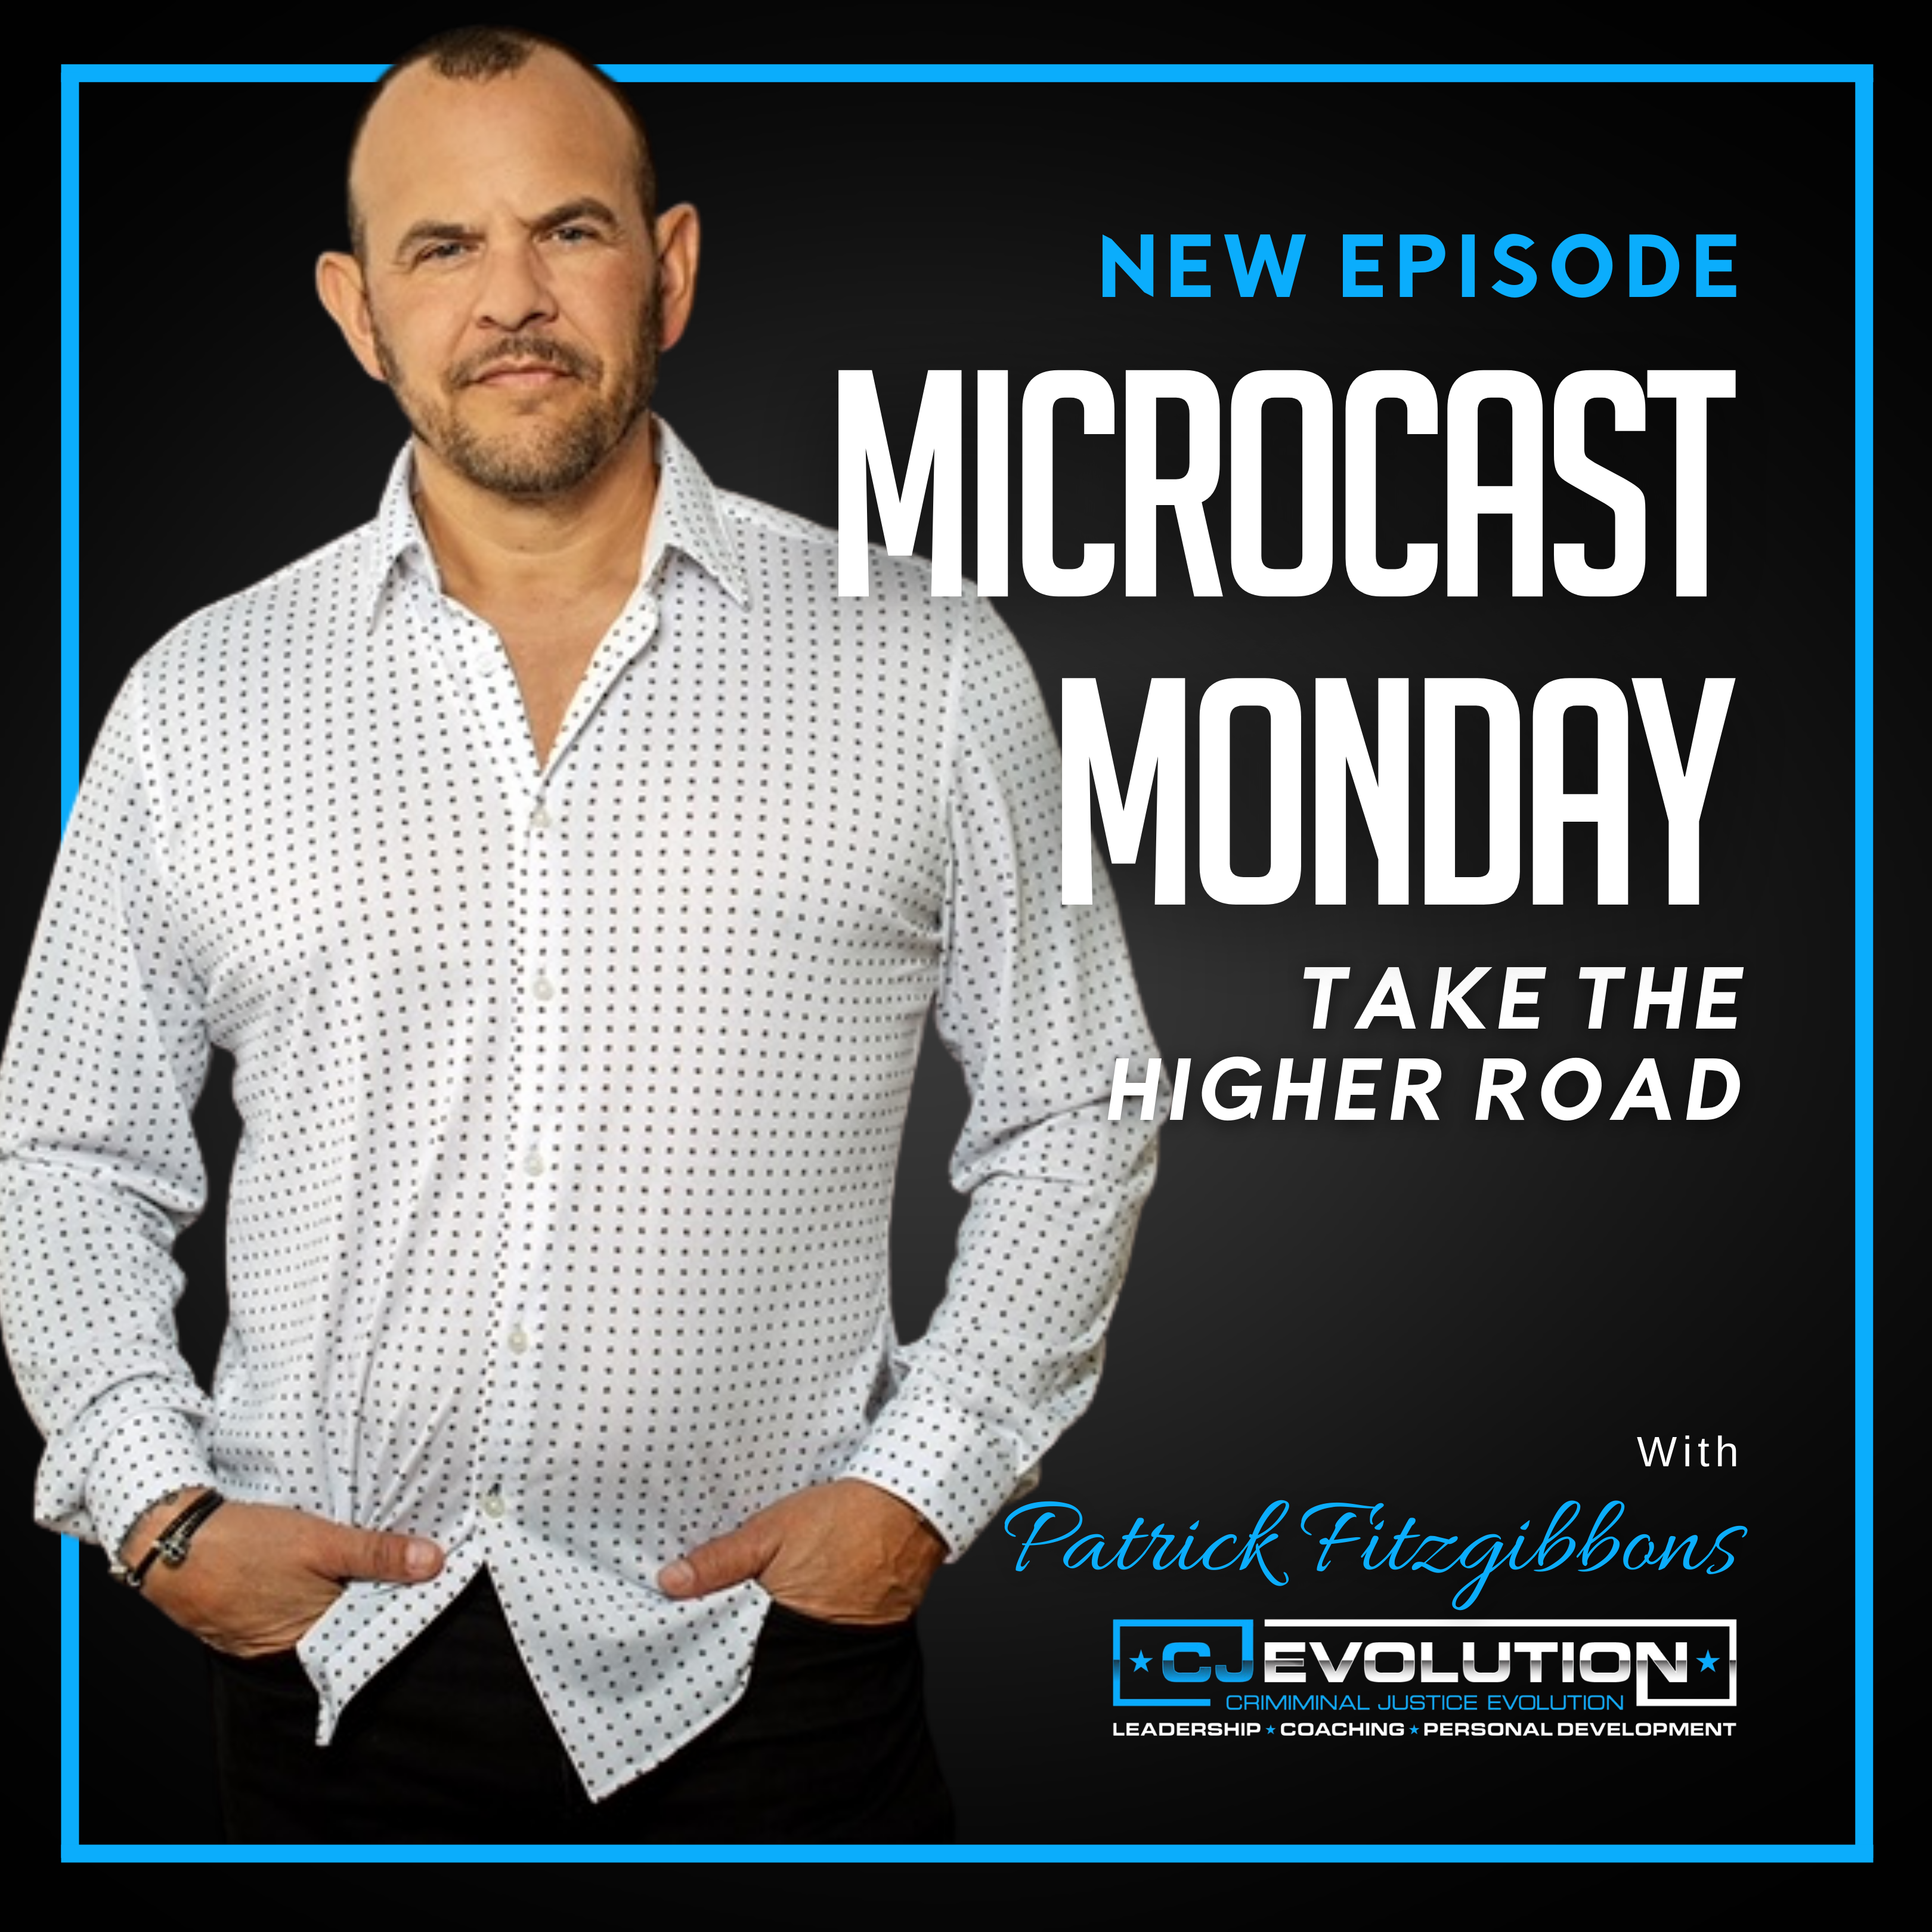 Microcast Monday #137 – Take the Higher Road